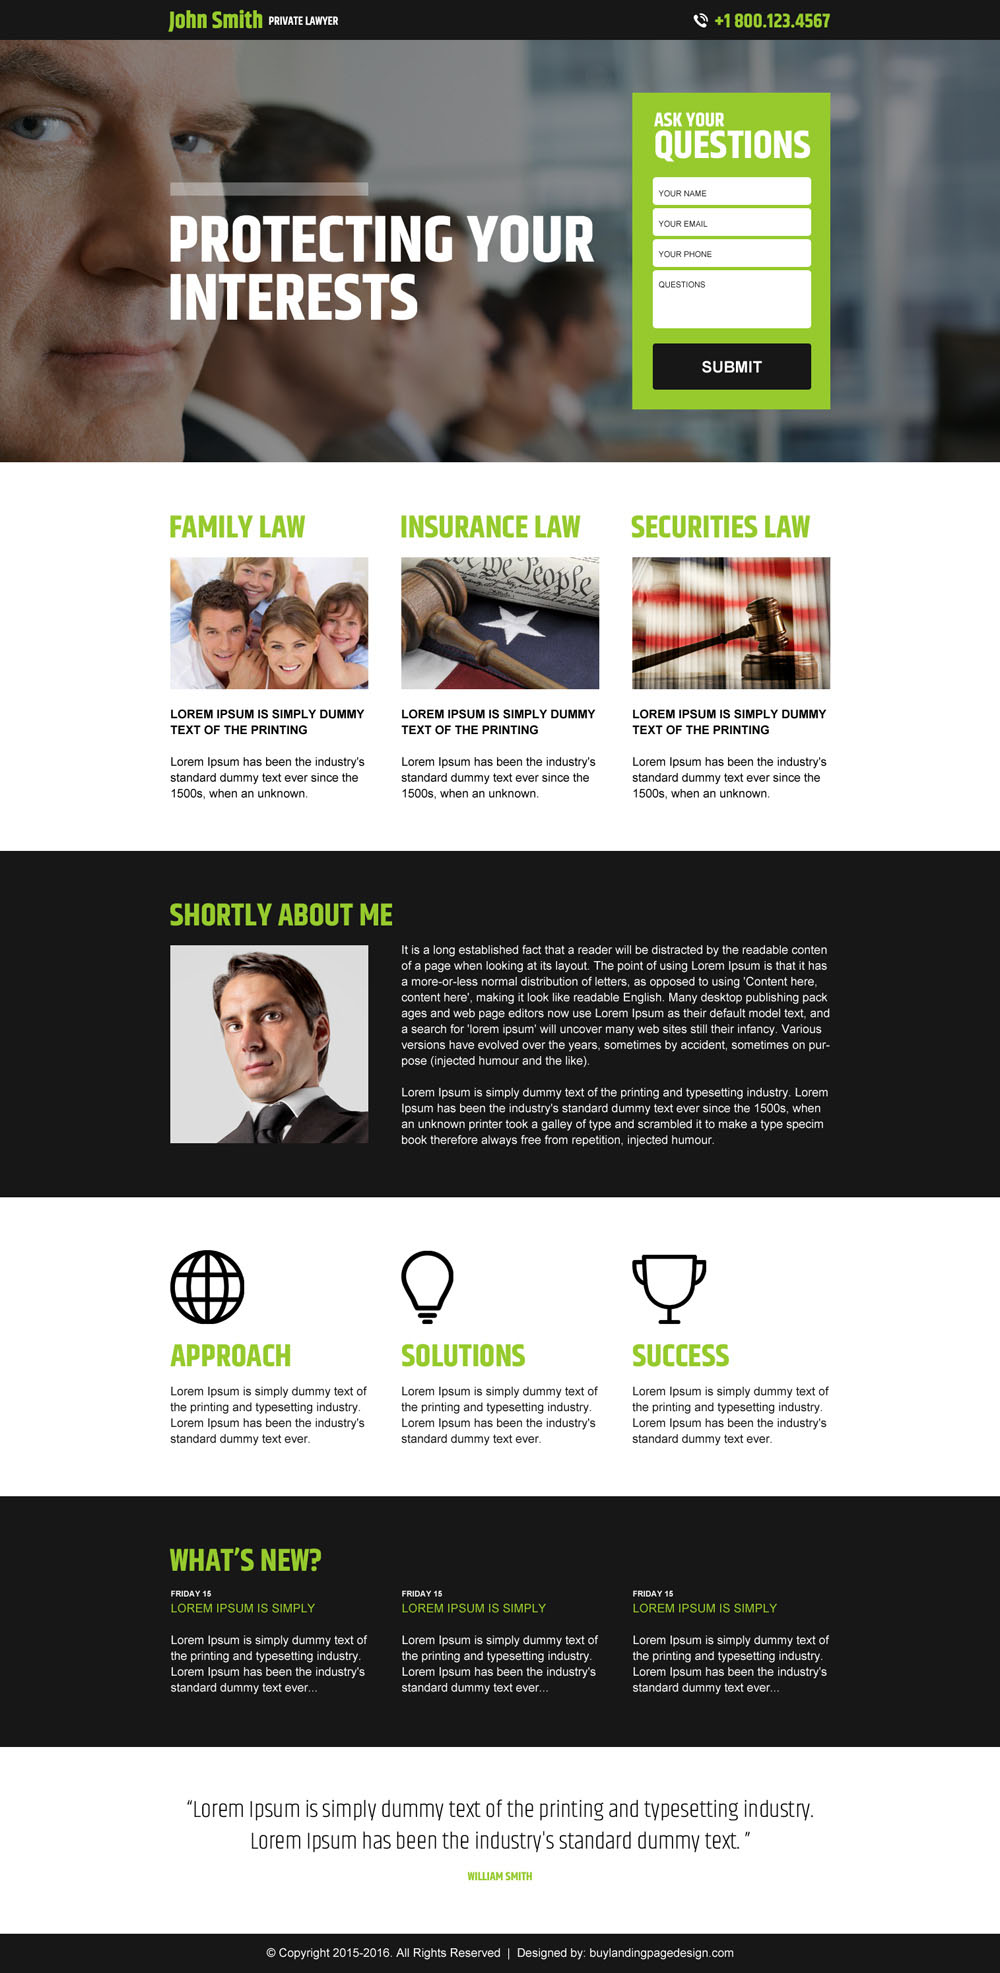 private-lawyer-lead-generation-best-converting-responsive-landing-page-design-005